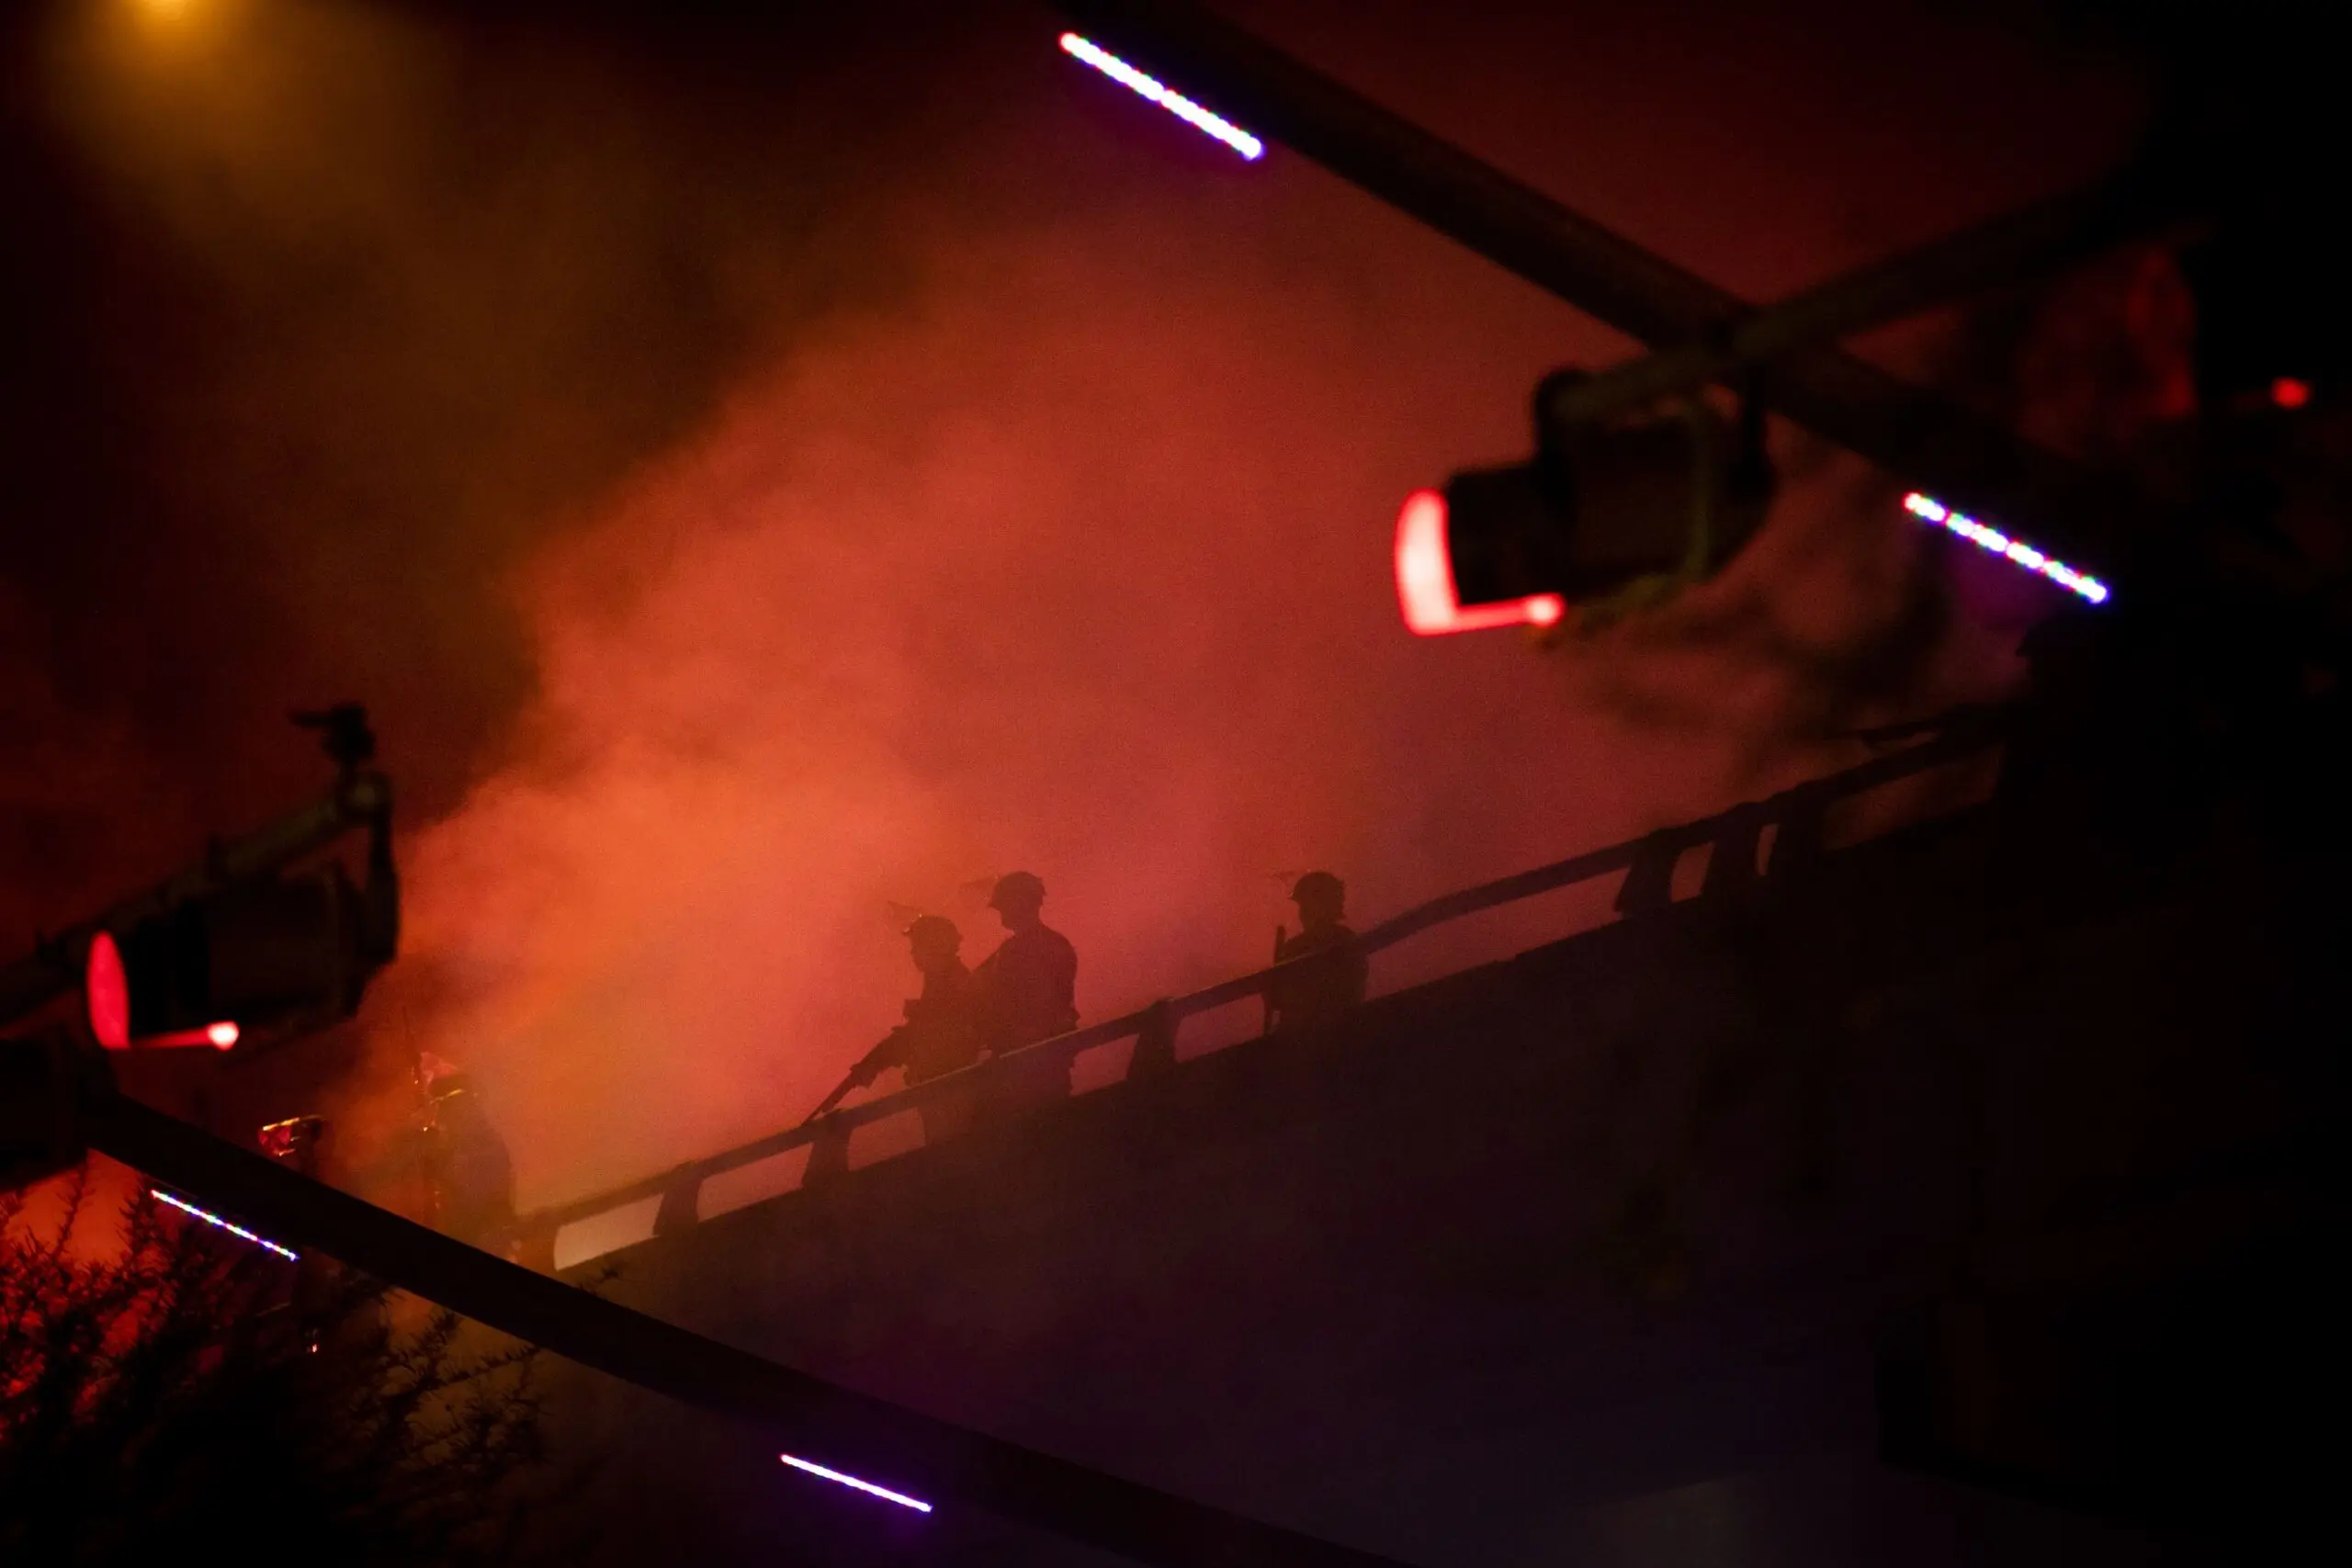 Austin Police officers watch demonstrators from a perch on I-35 on May 30, 2020. Officers occasionally shot into the crowd to disperse protesters.